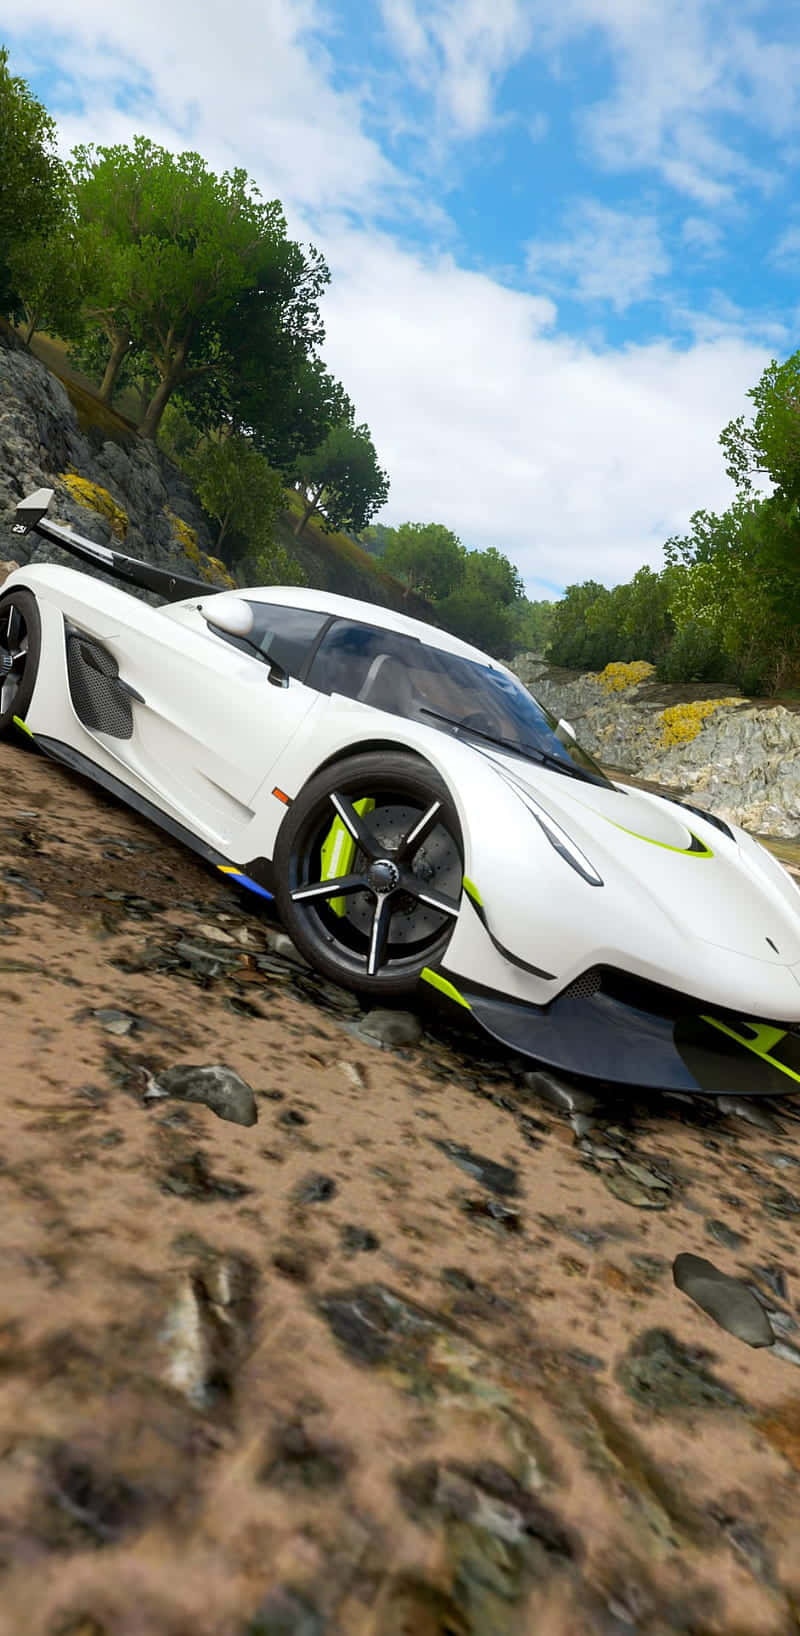 Race Your Way Through More Than 450 Different Cars In Forza Horizon 4